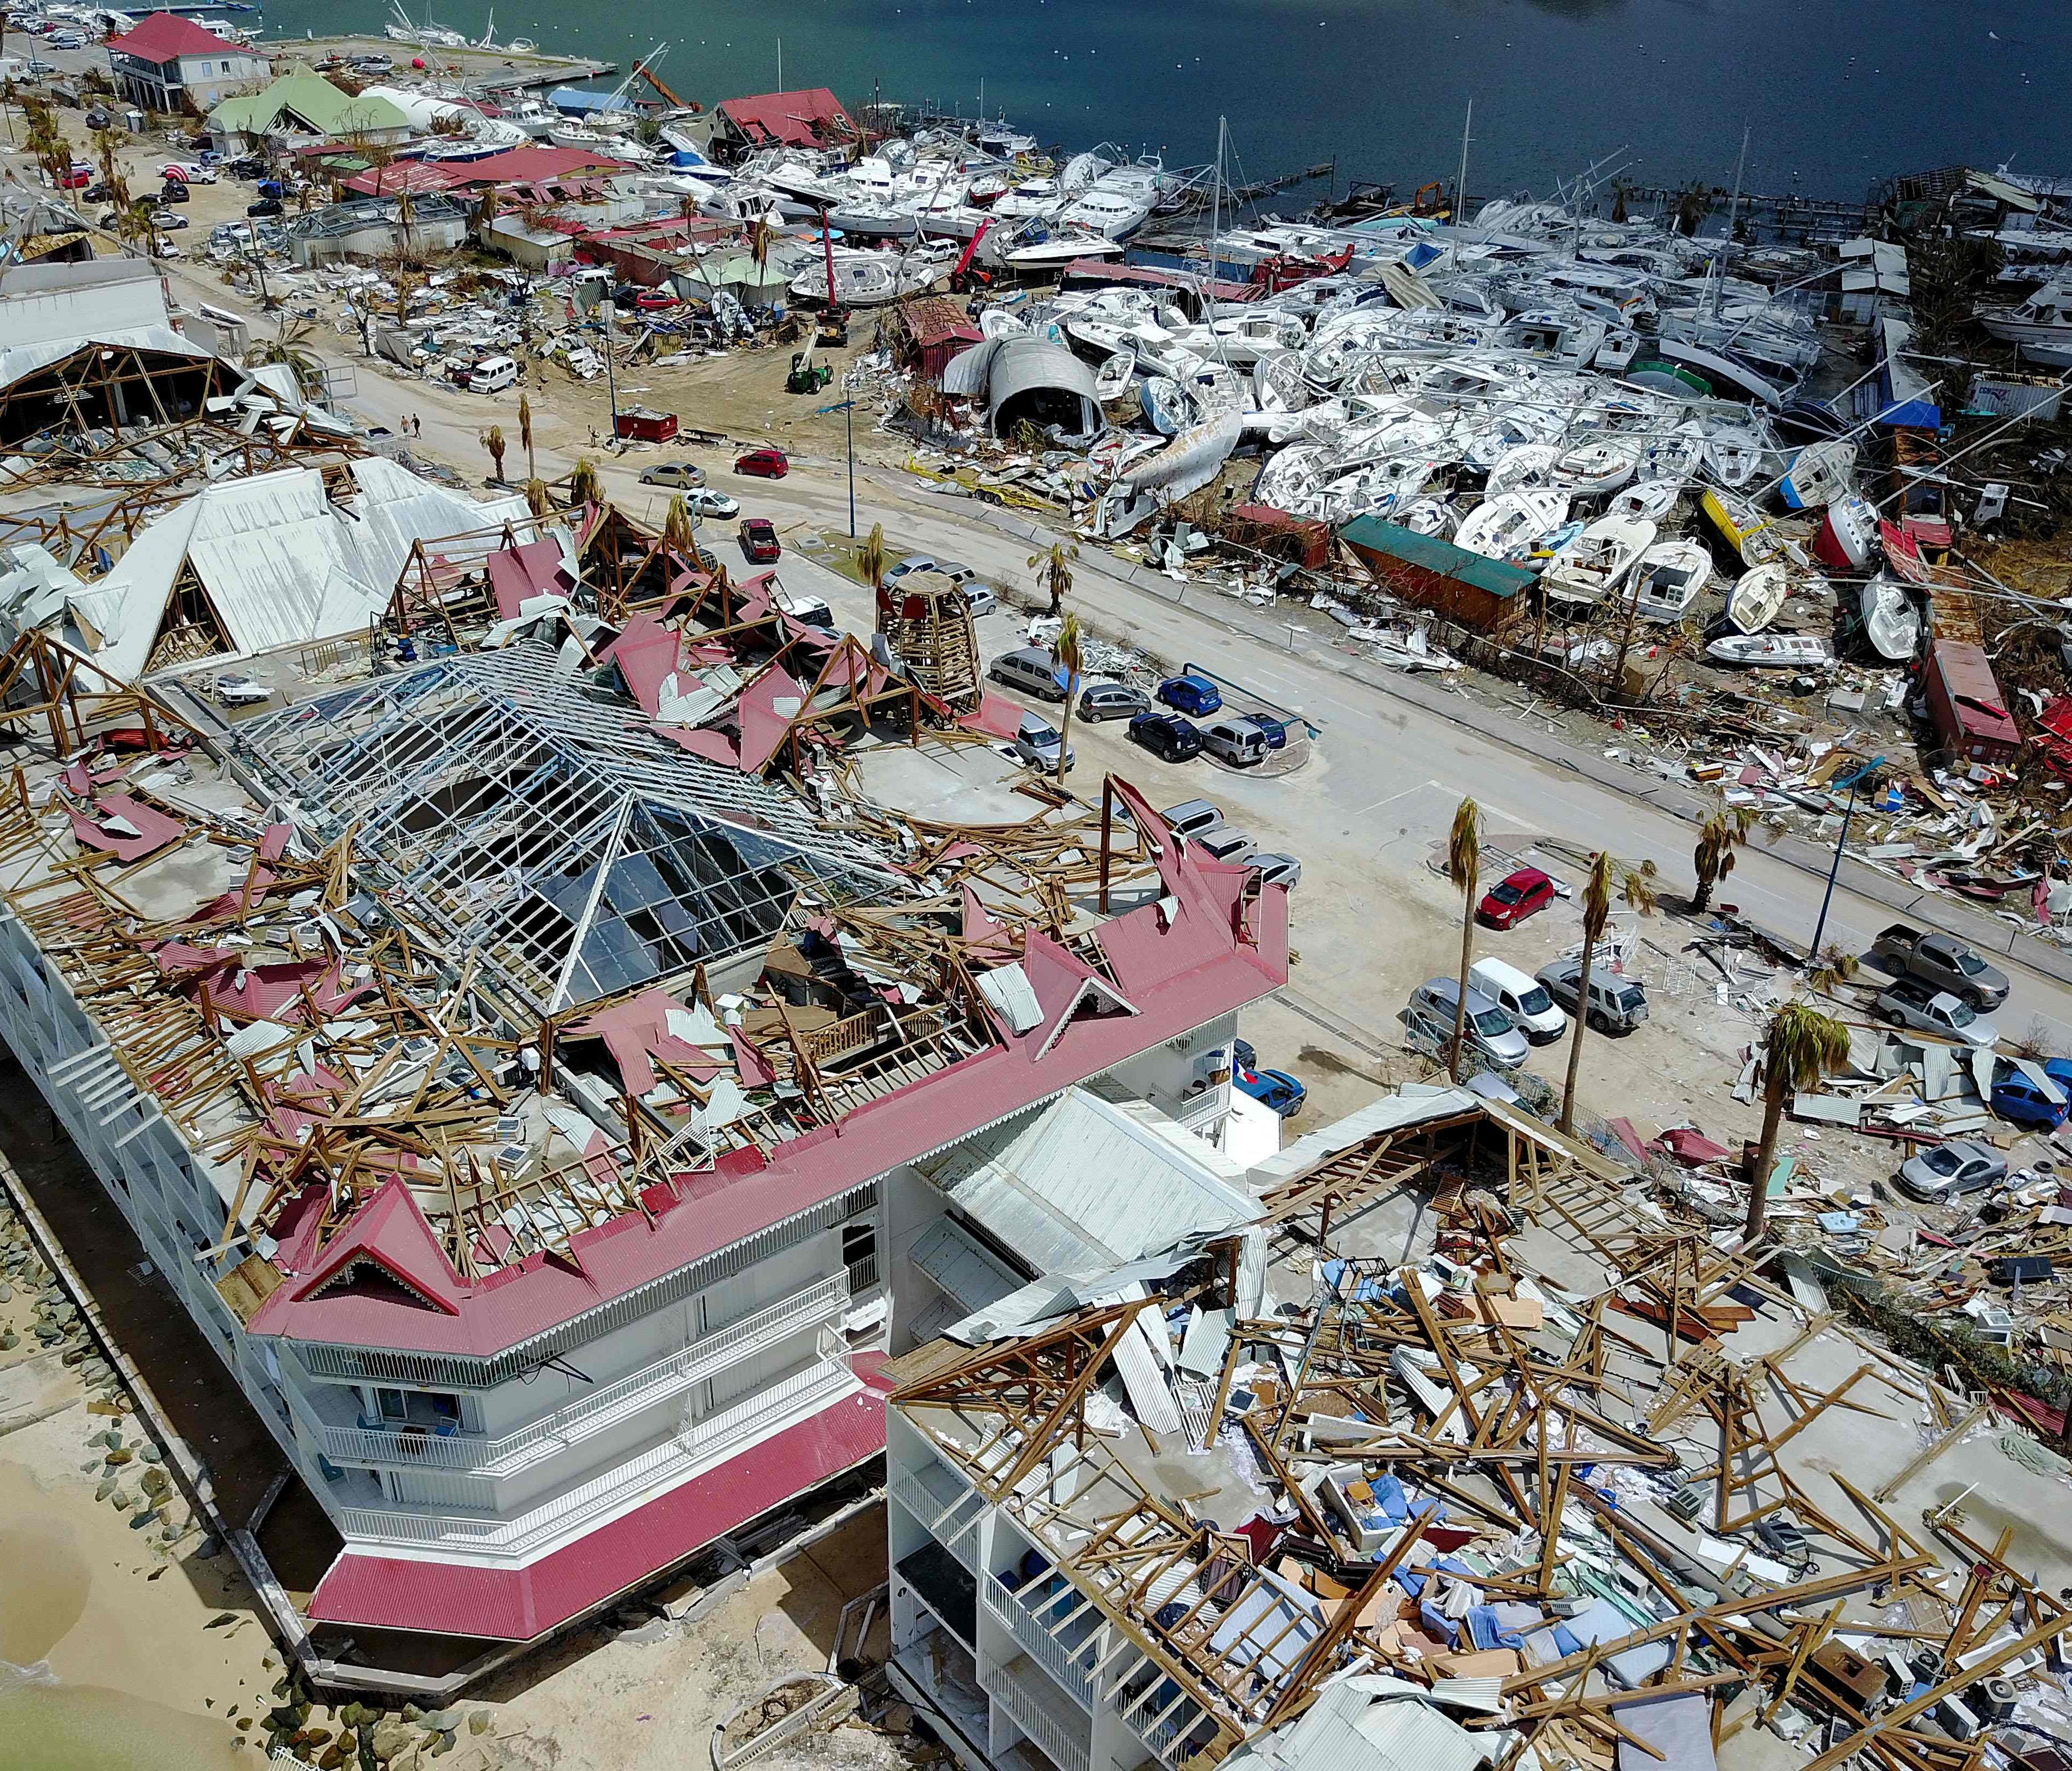 An aerial view shows extensive damage to houses and businesses in St. Martin on Sept. 15, 2017, days after Hurricane Irma struck this Caribbean island.